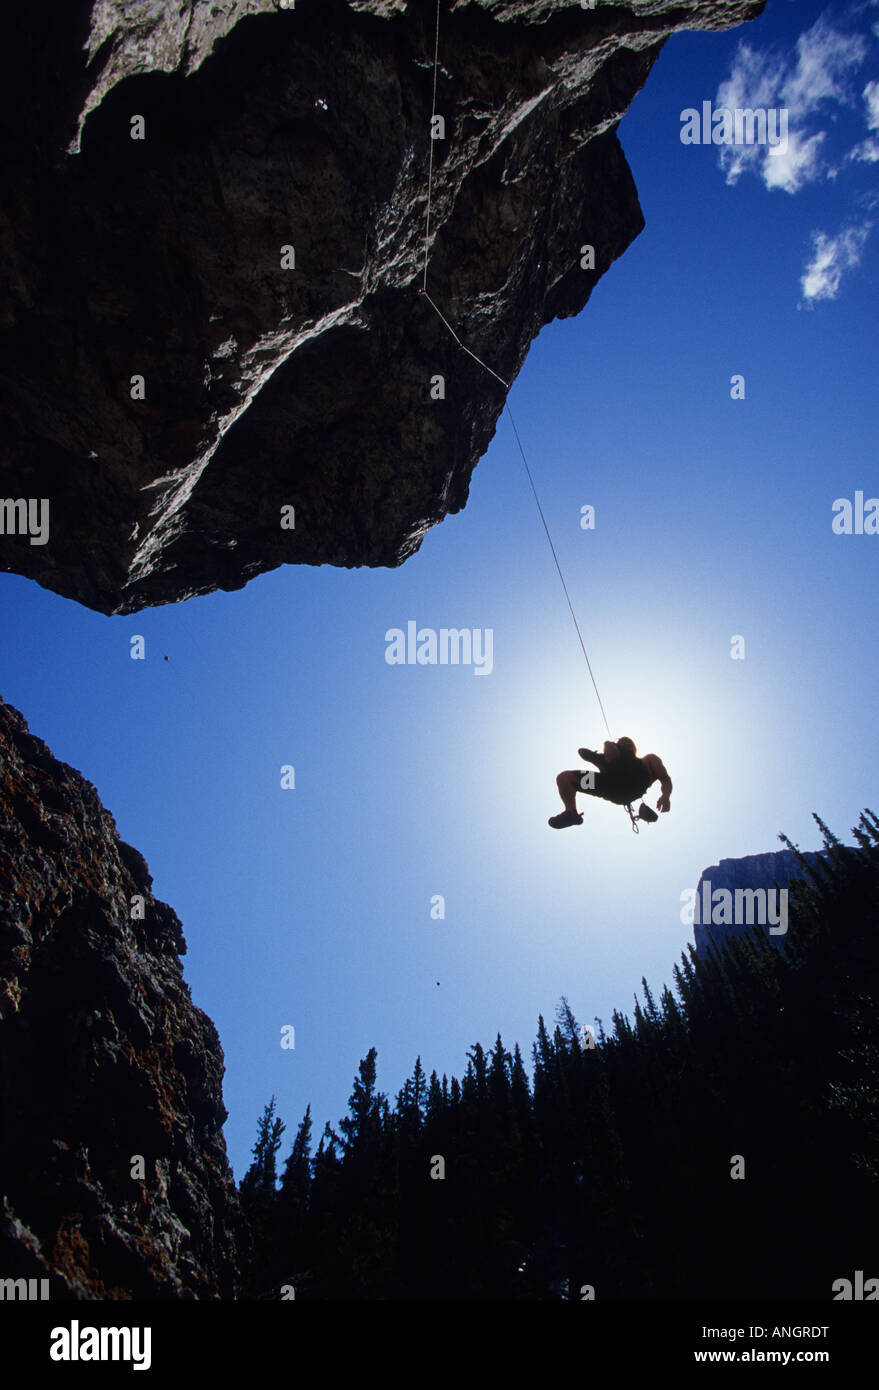 A young man being lowered after he leads, Grassi Lakes, Canmore, Alberta, Canada. Stock Photo